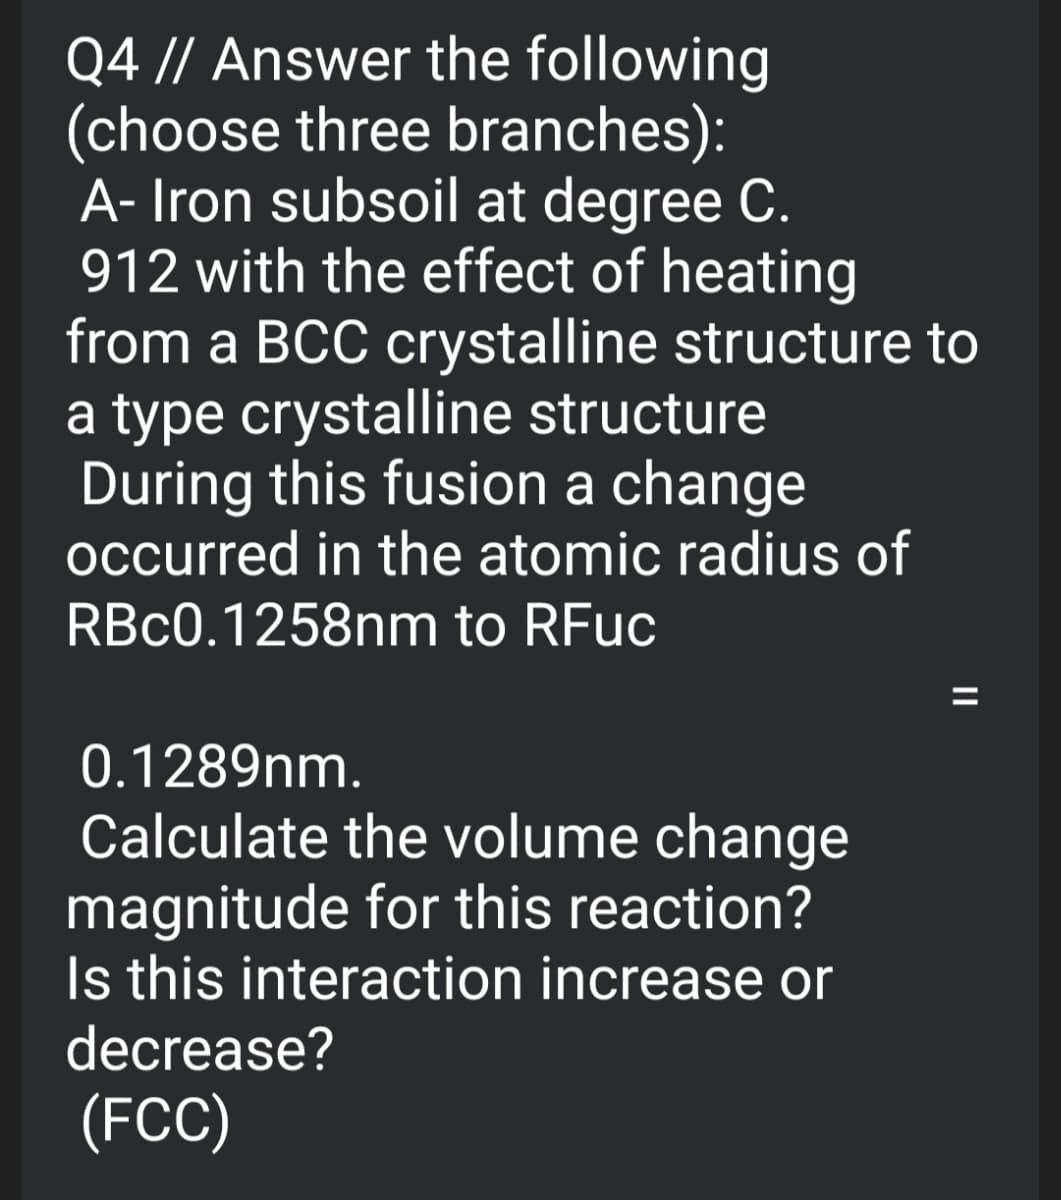 Q4 // Answer the following
(choose three branches):
A- Iron subsoil at degree C.
912 with the effect of heating
from a BCC crystalline structure to
a type crystalline structure
During this fusion a change
occurred in the atomic radius of
RBC0.1258nm to RFuc
0.1289nm.
Calculate the volume change
magnitude for this reaction?
Is this interaction increase or
decrease?
(FCC)
